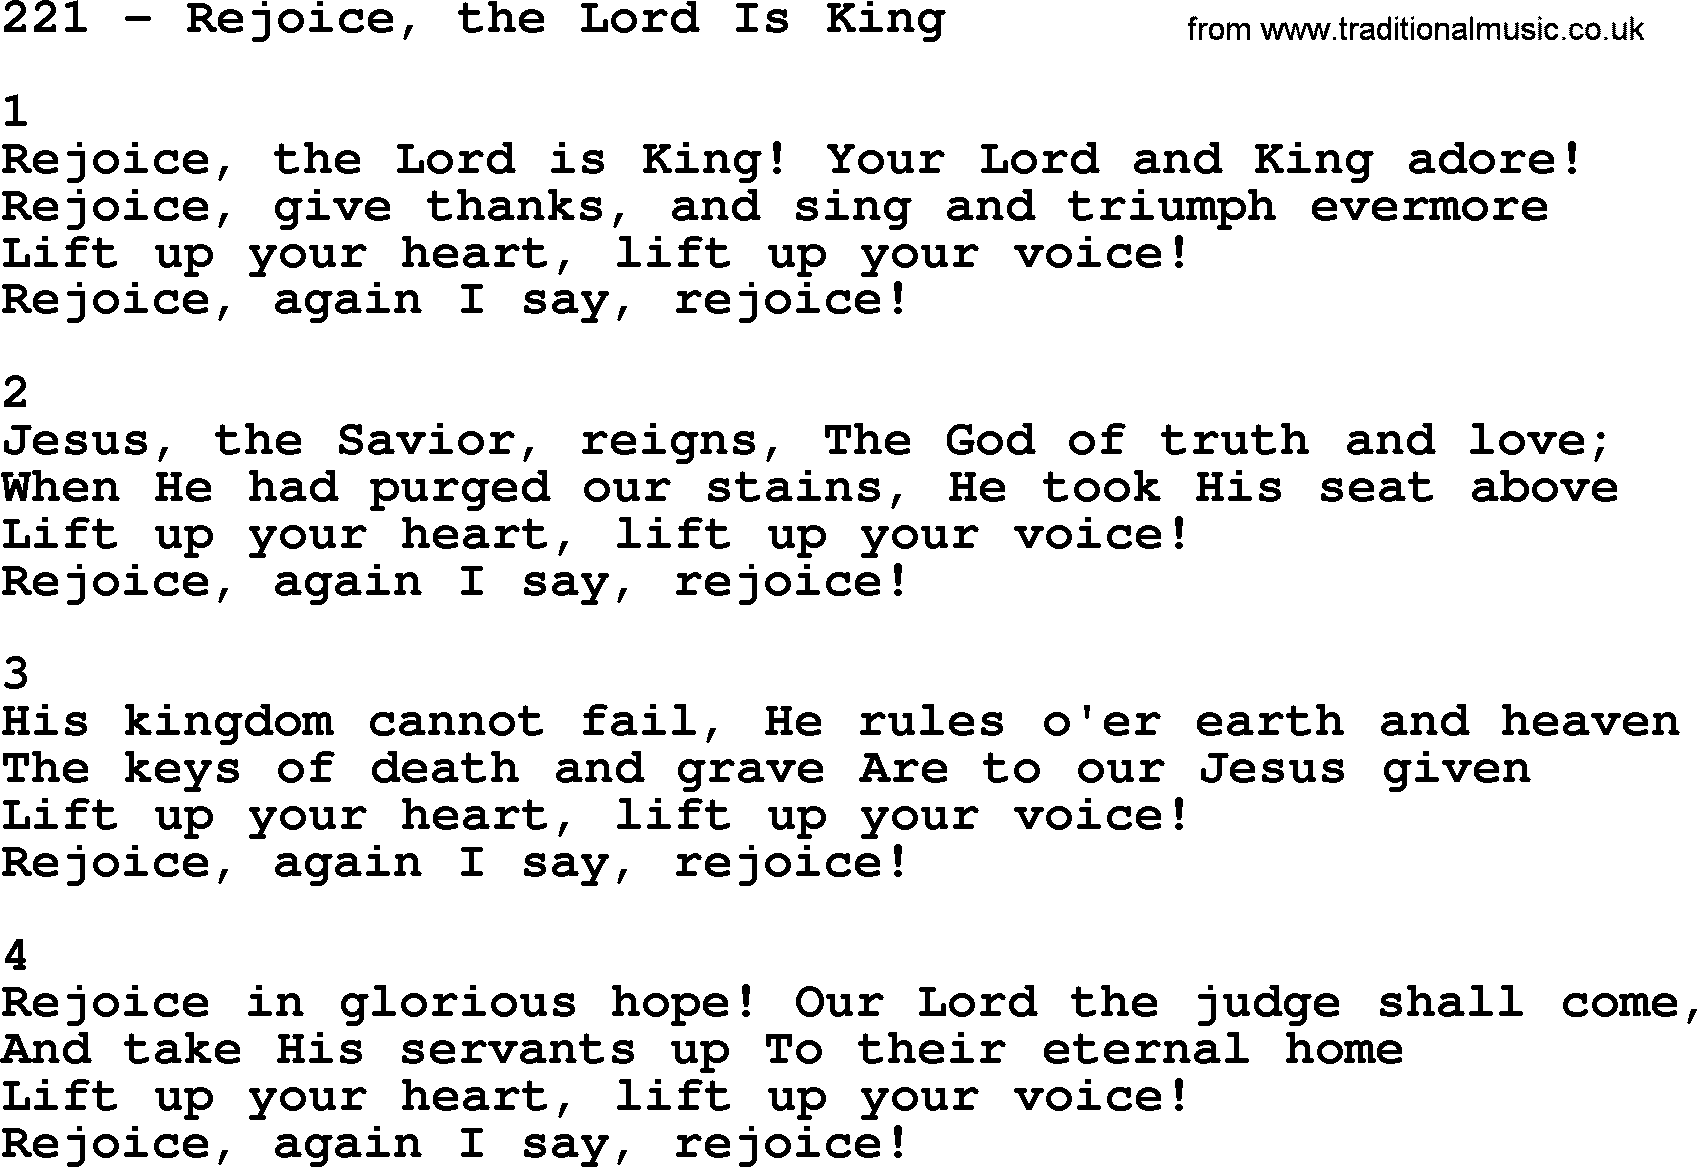 Complete Adventis Hymnal, title: 221-Rejoice, The Lord Is King, with lyrics, midi, mp3, powerpoints(PPT) and PDF,